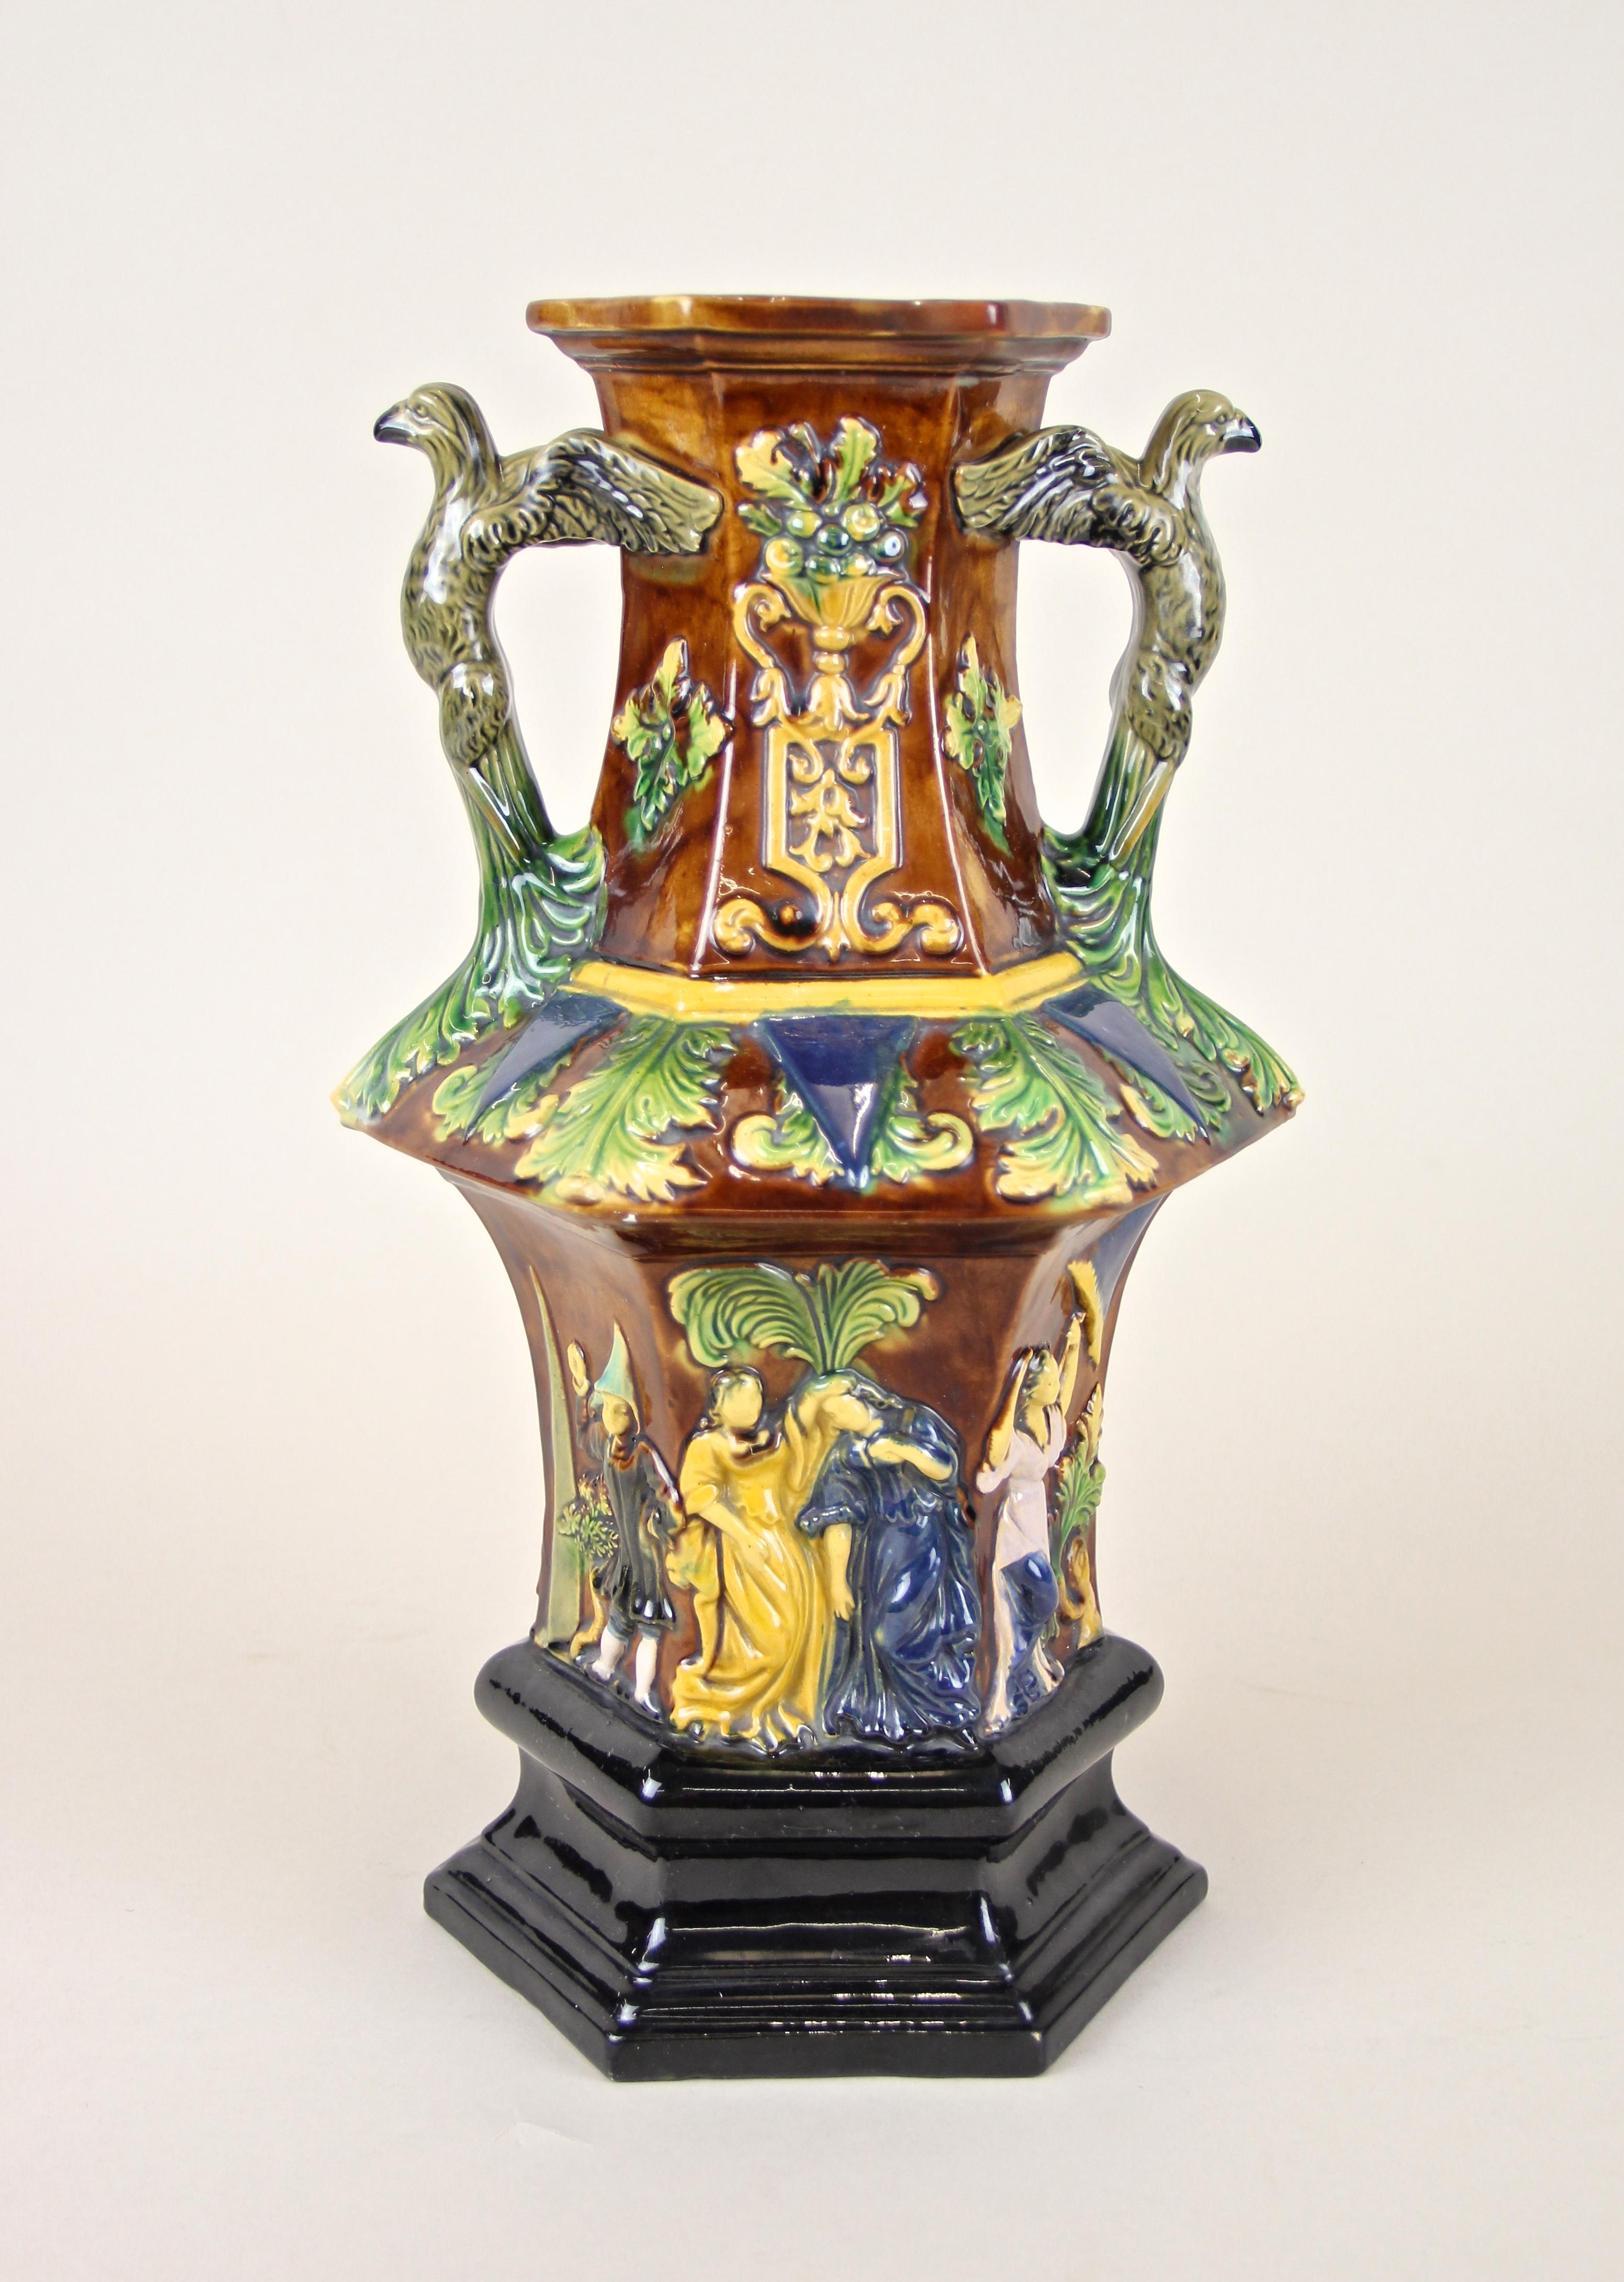 From circa 1860 out of Bohemia comes this lovely colorful Majolica pagoda vase from the famous company of Wilhelm Schiller & Son. A unique shaped, wonderfully colored body in dark brown and black base, shows a fantastic design with foliage and